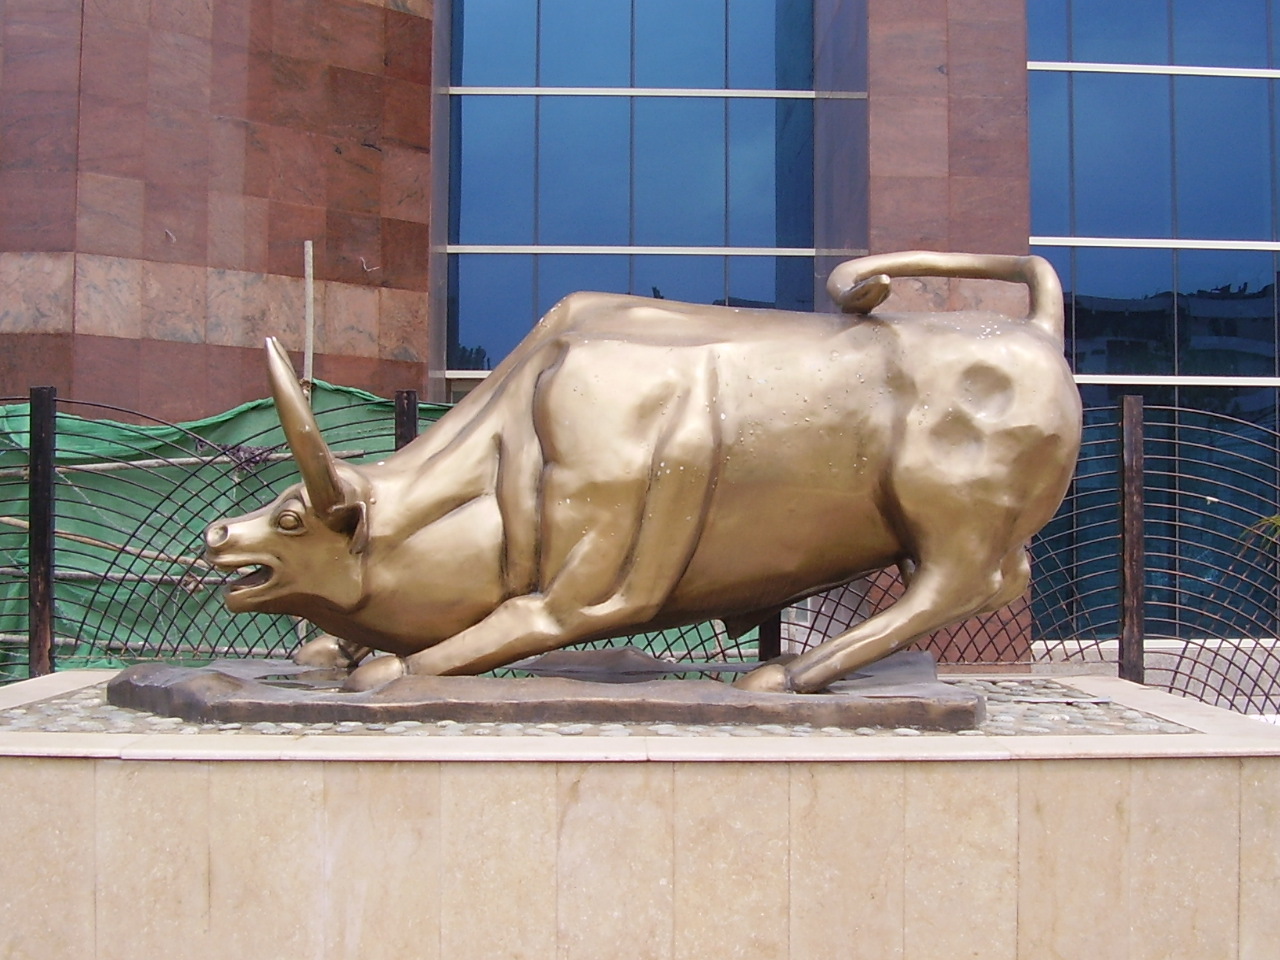 http://upload.wikimedia.org/wikipedia/commons/a/a1/Islamabad_Stock_Exchange_Bull.JPG